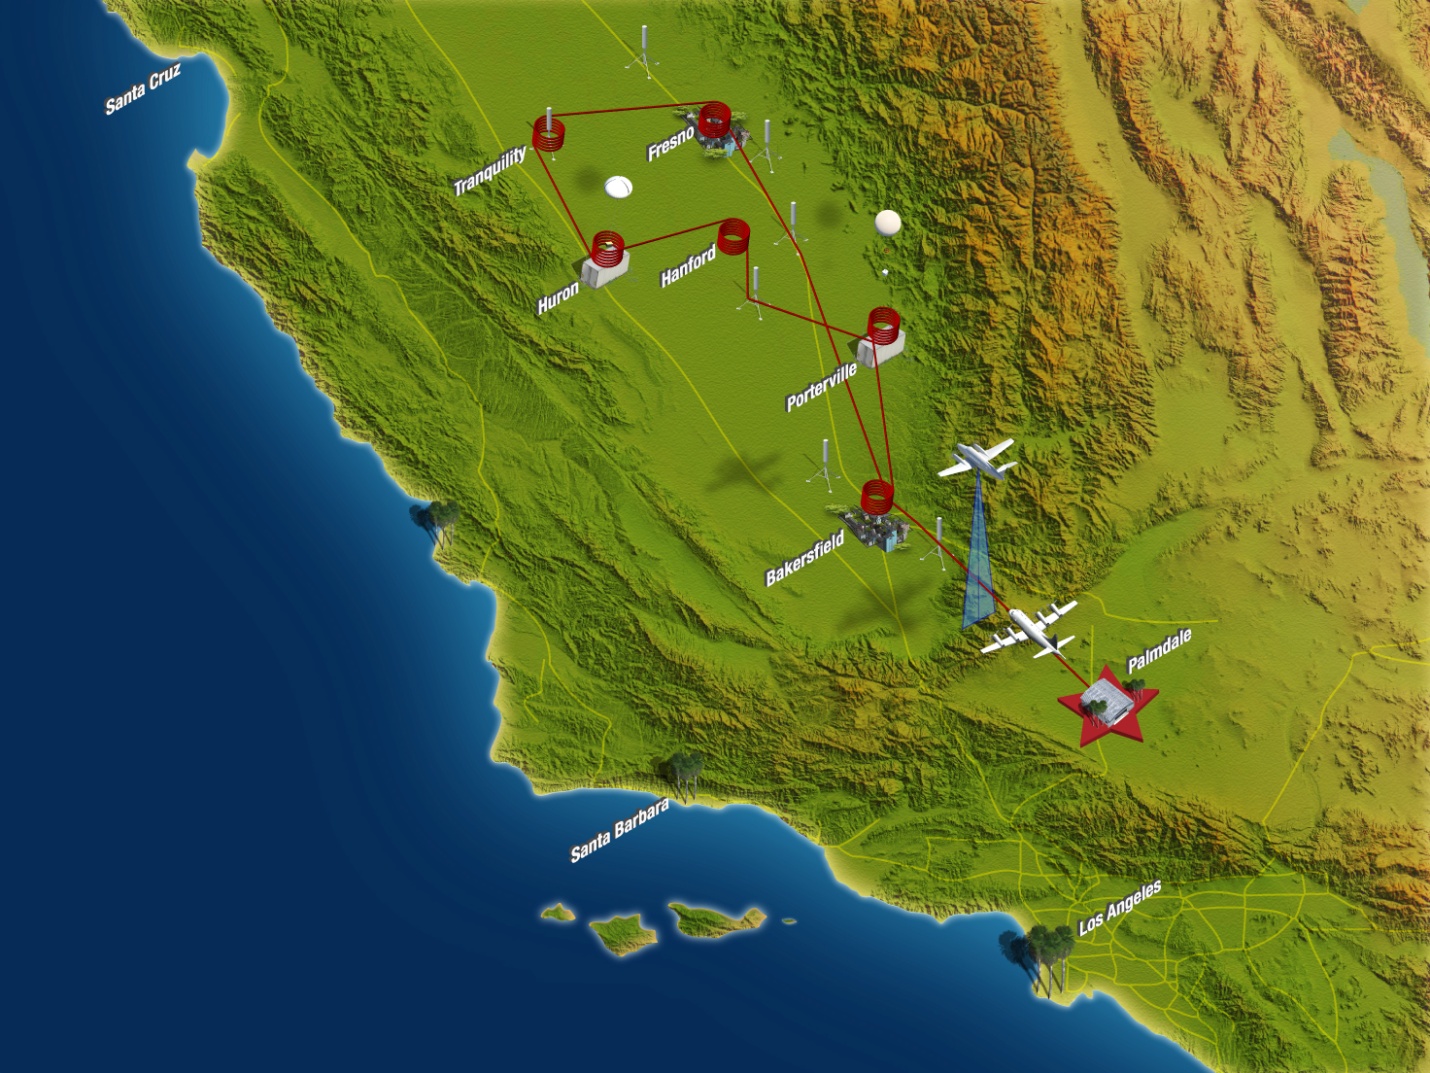 Map of the 2013 California DISCOVER-AQ measurements, including the flight track of the P3-B (shown in red) as well as other ground and airborne measurements.